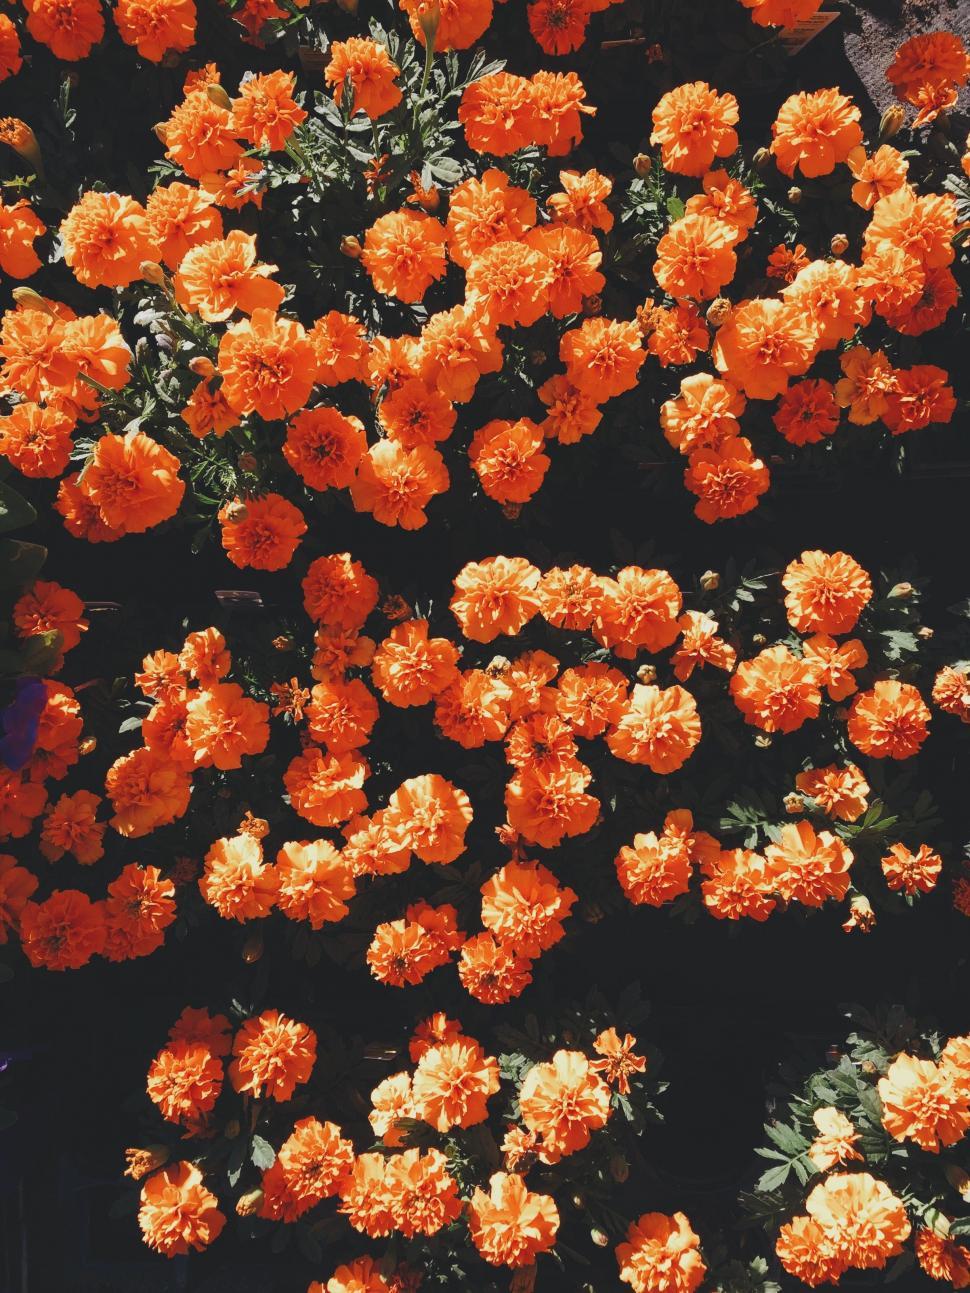 Free Image of Orange Flowers Blooming in a Garden 